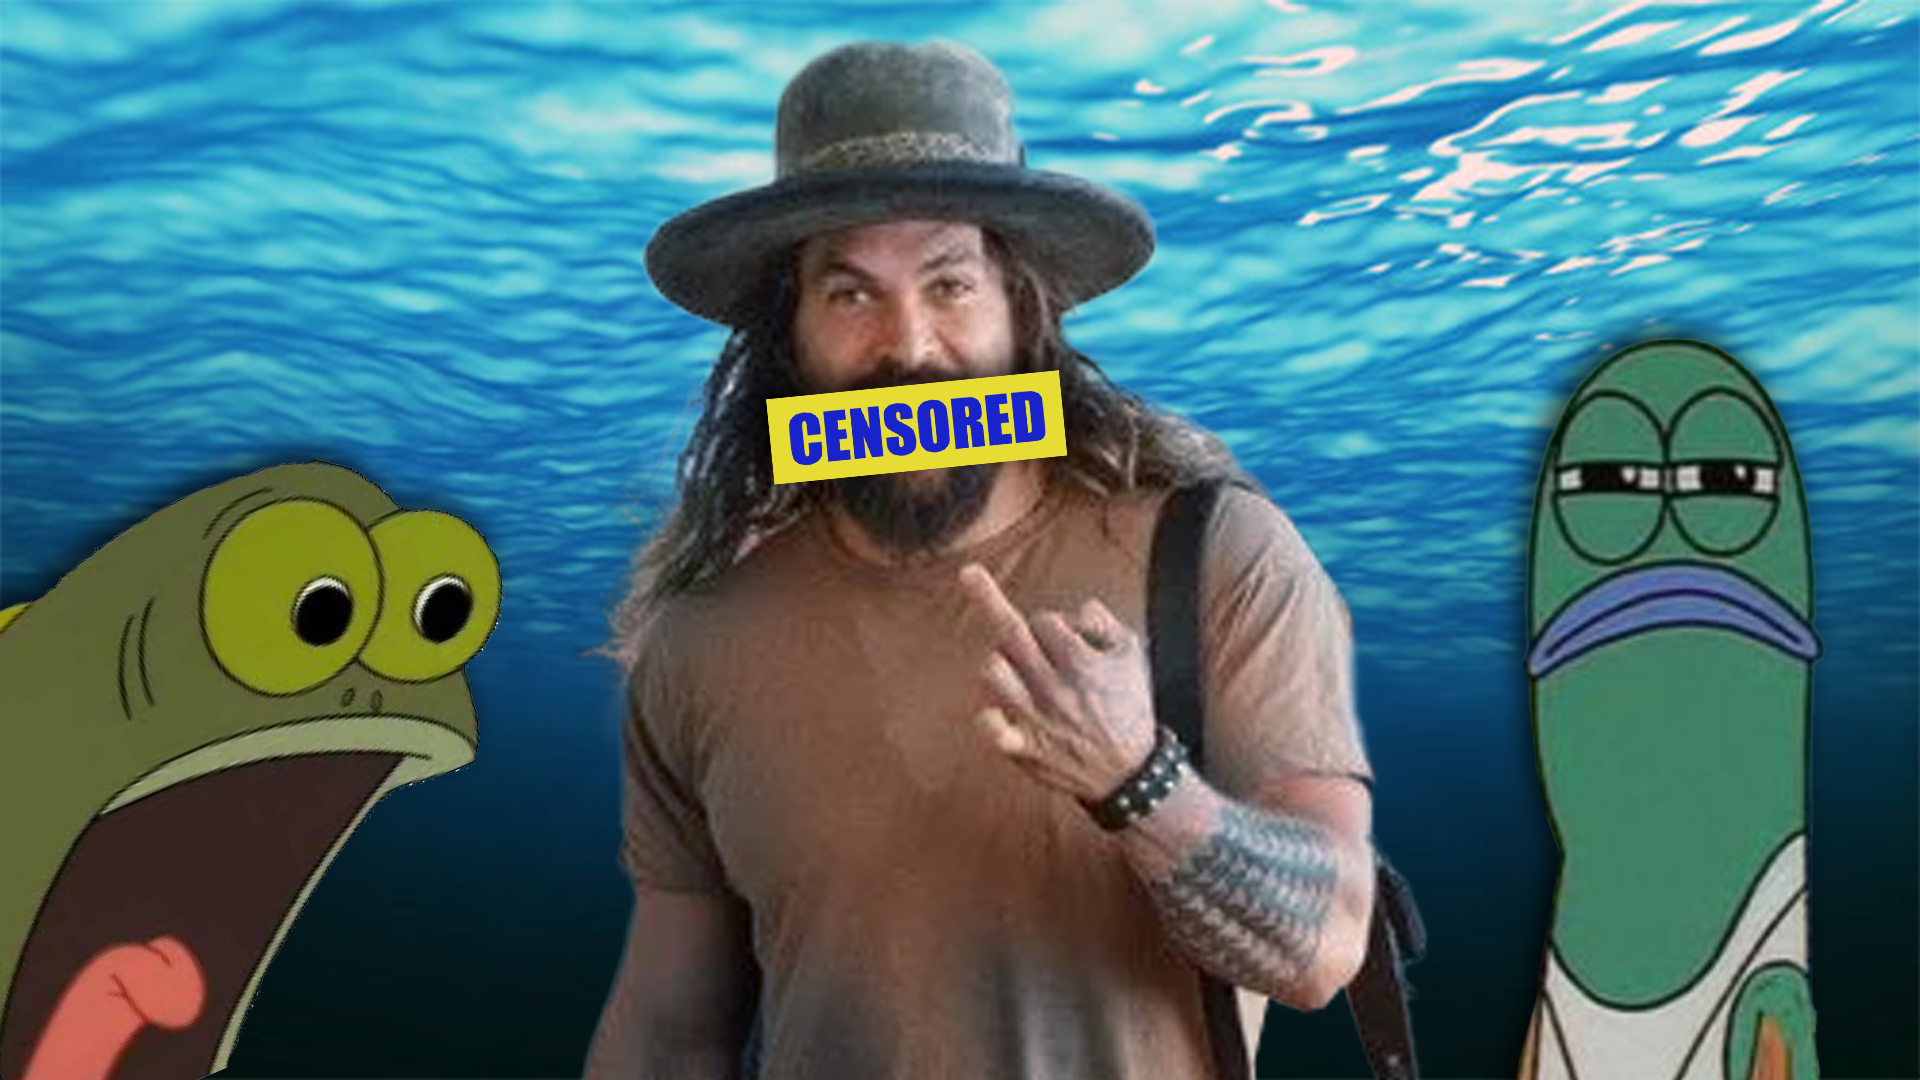 Jason Momoa Has Perfect Response To Being Asked “What Kind Of Fish” Did He Sleep With